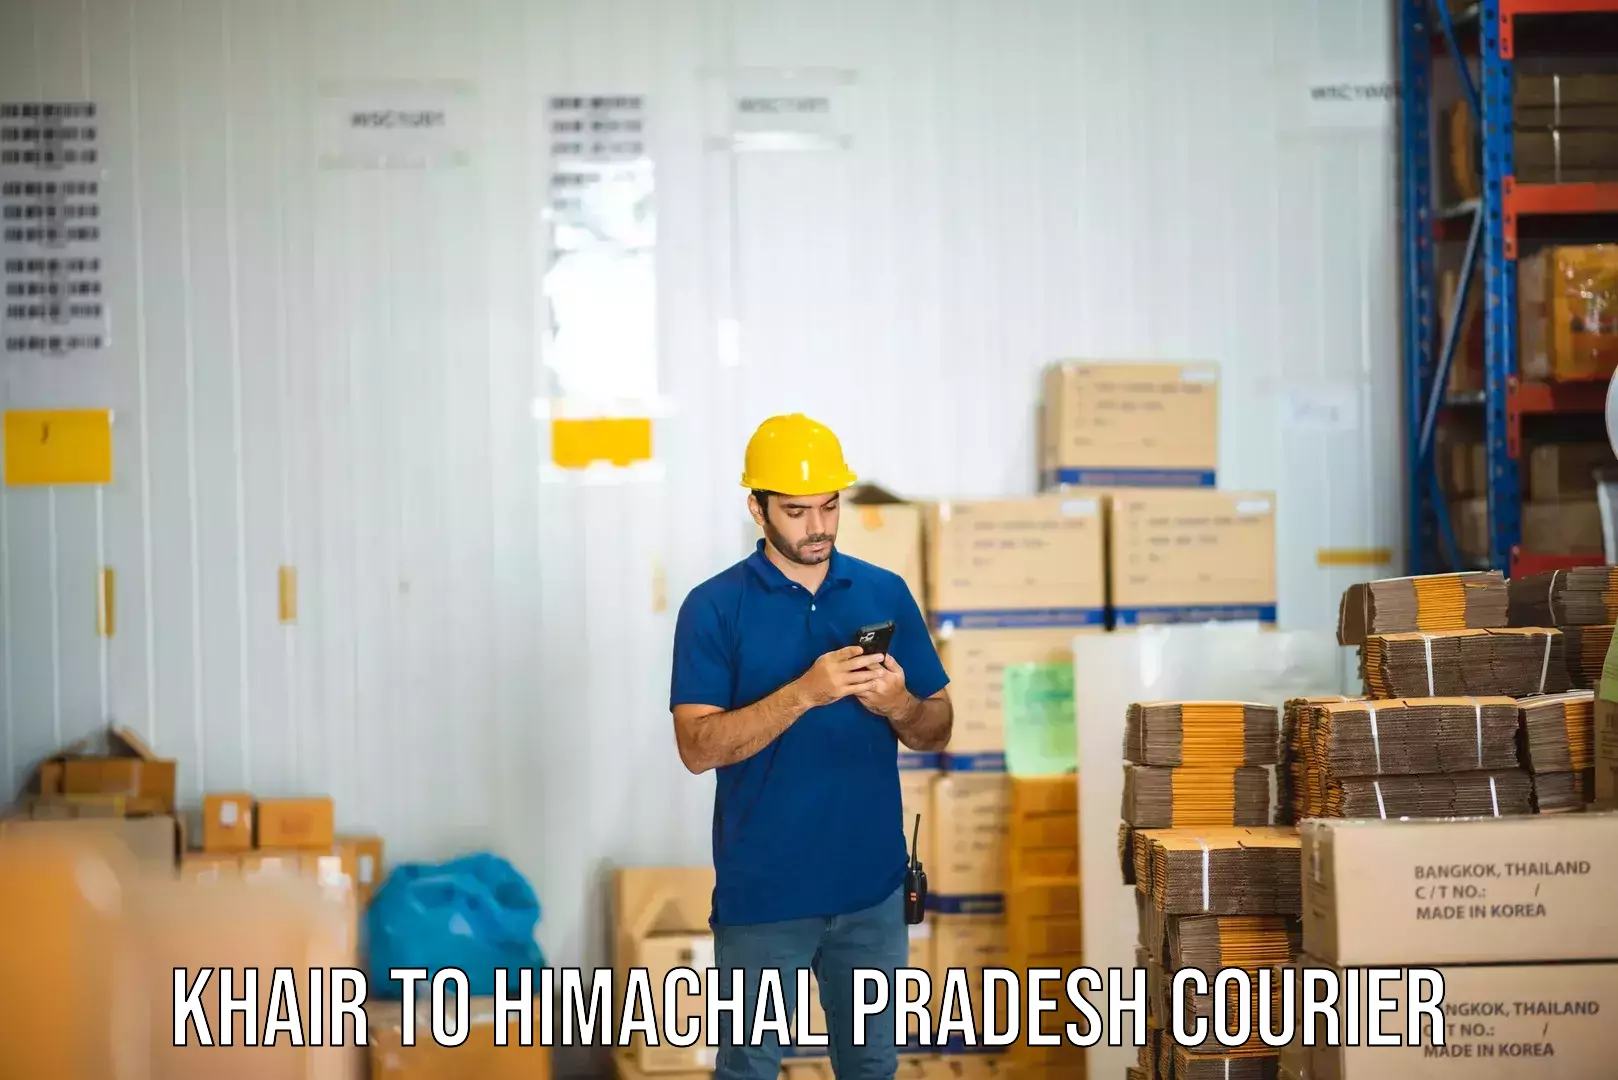 End-to-end delivery in Khair to Himachal Pradesh